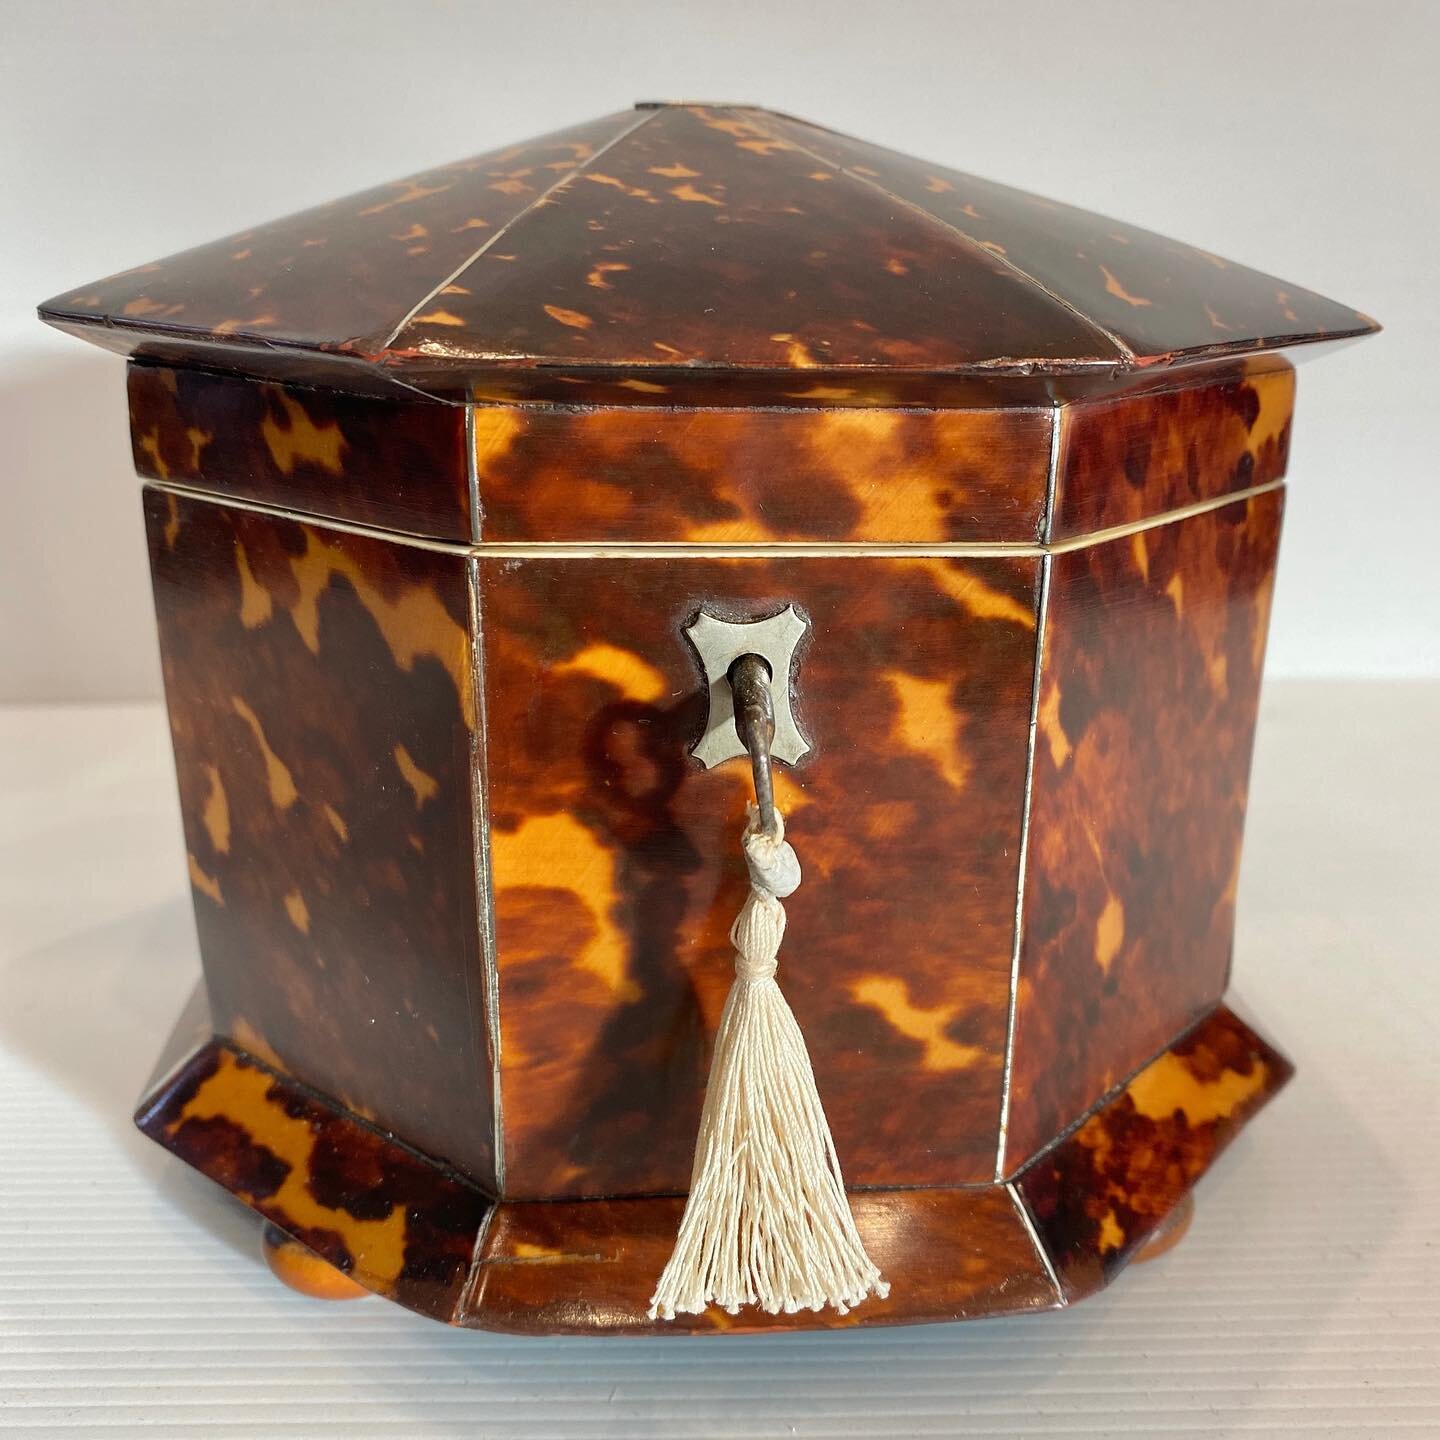 A recent restoration of this gorgeous 19th century tortoise shell octagonal shaped tea caddy with silver stringing and ivory trimming.